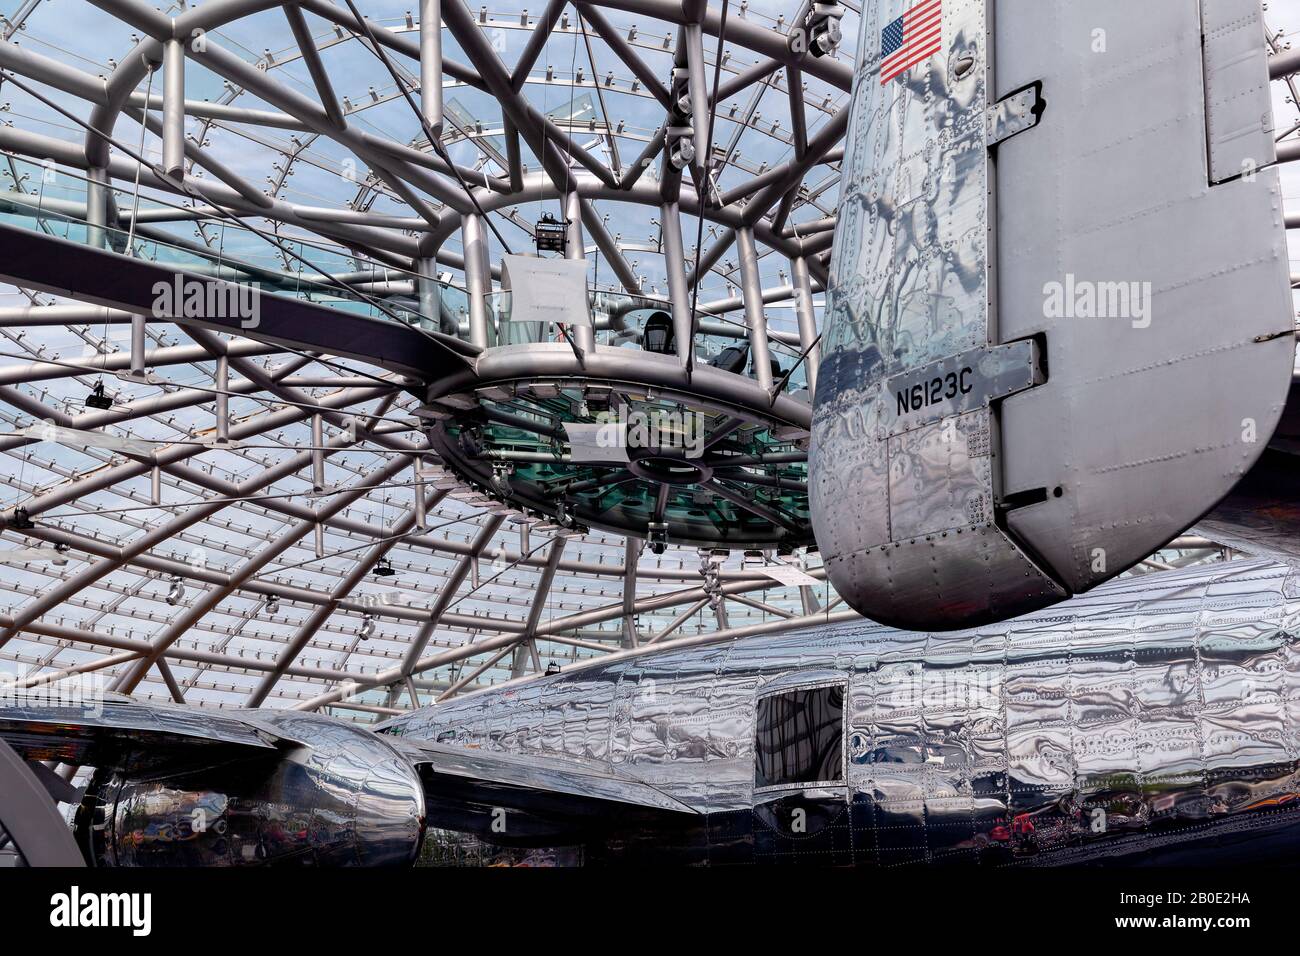 Salzburg / Austria - August 2019: Red Bull Hangar-7, a modern glass and steel building hosting a collection of historical airplanes, helicopters. Stock Photo